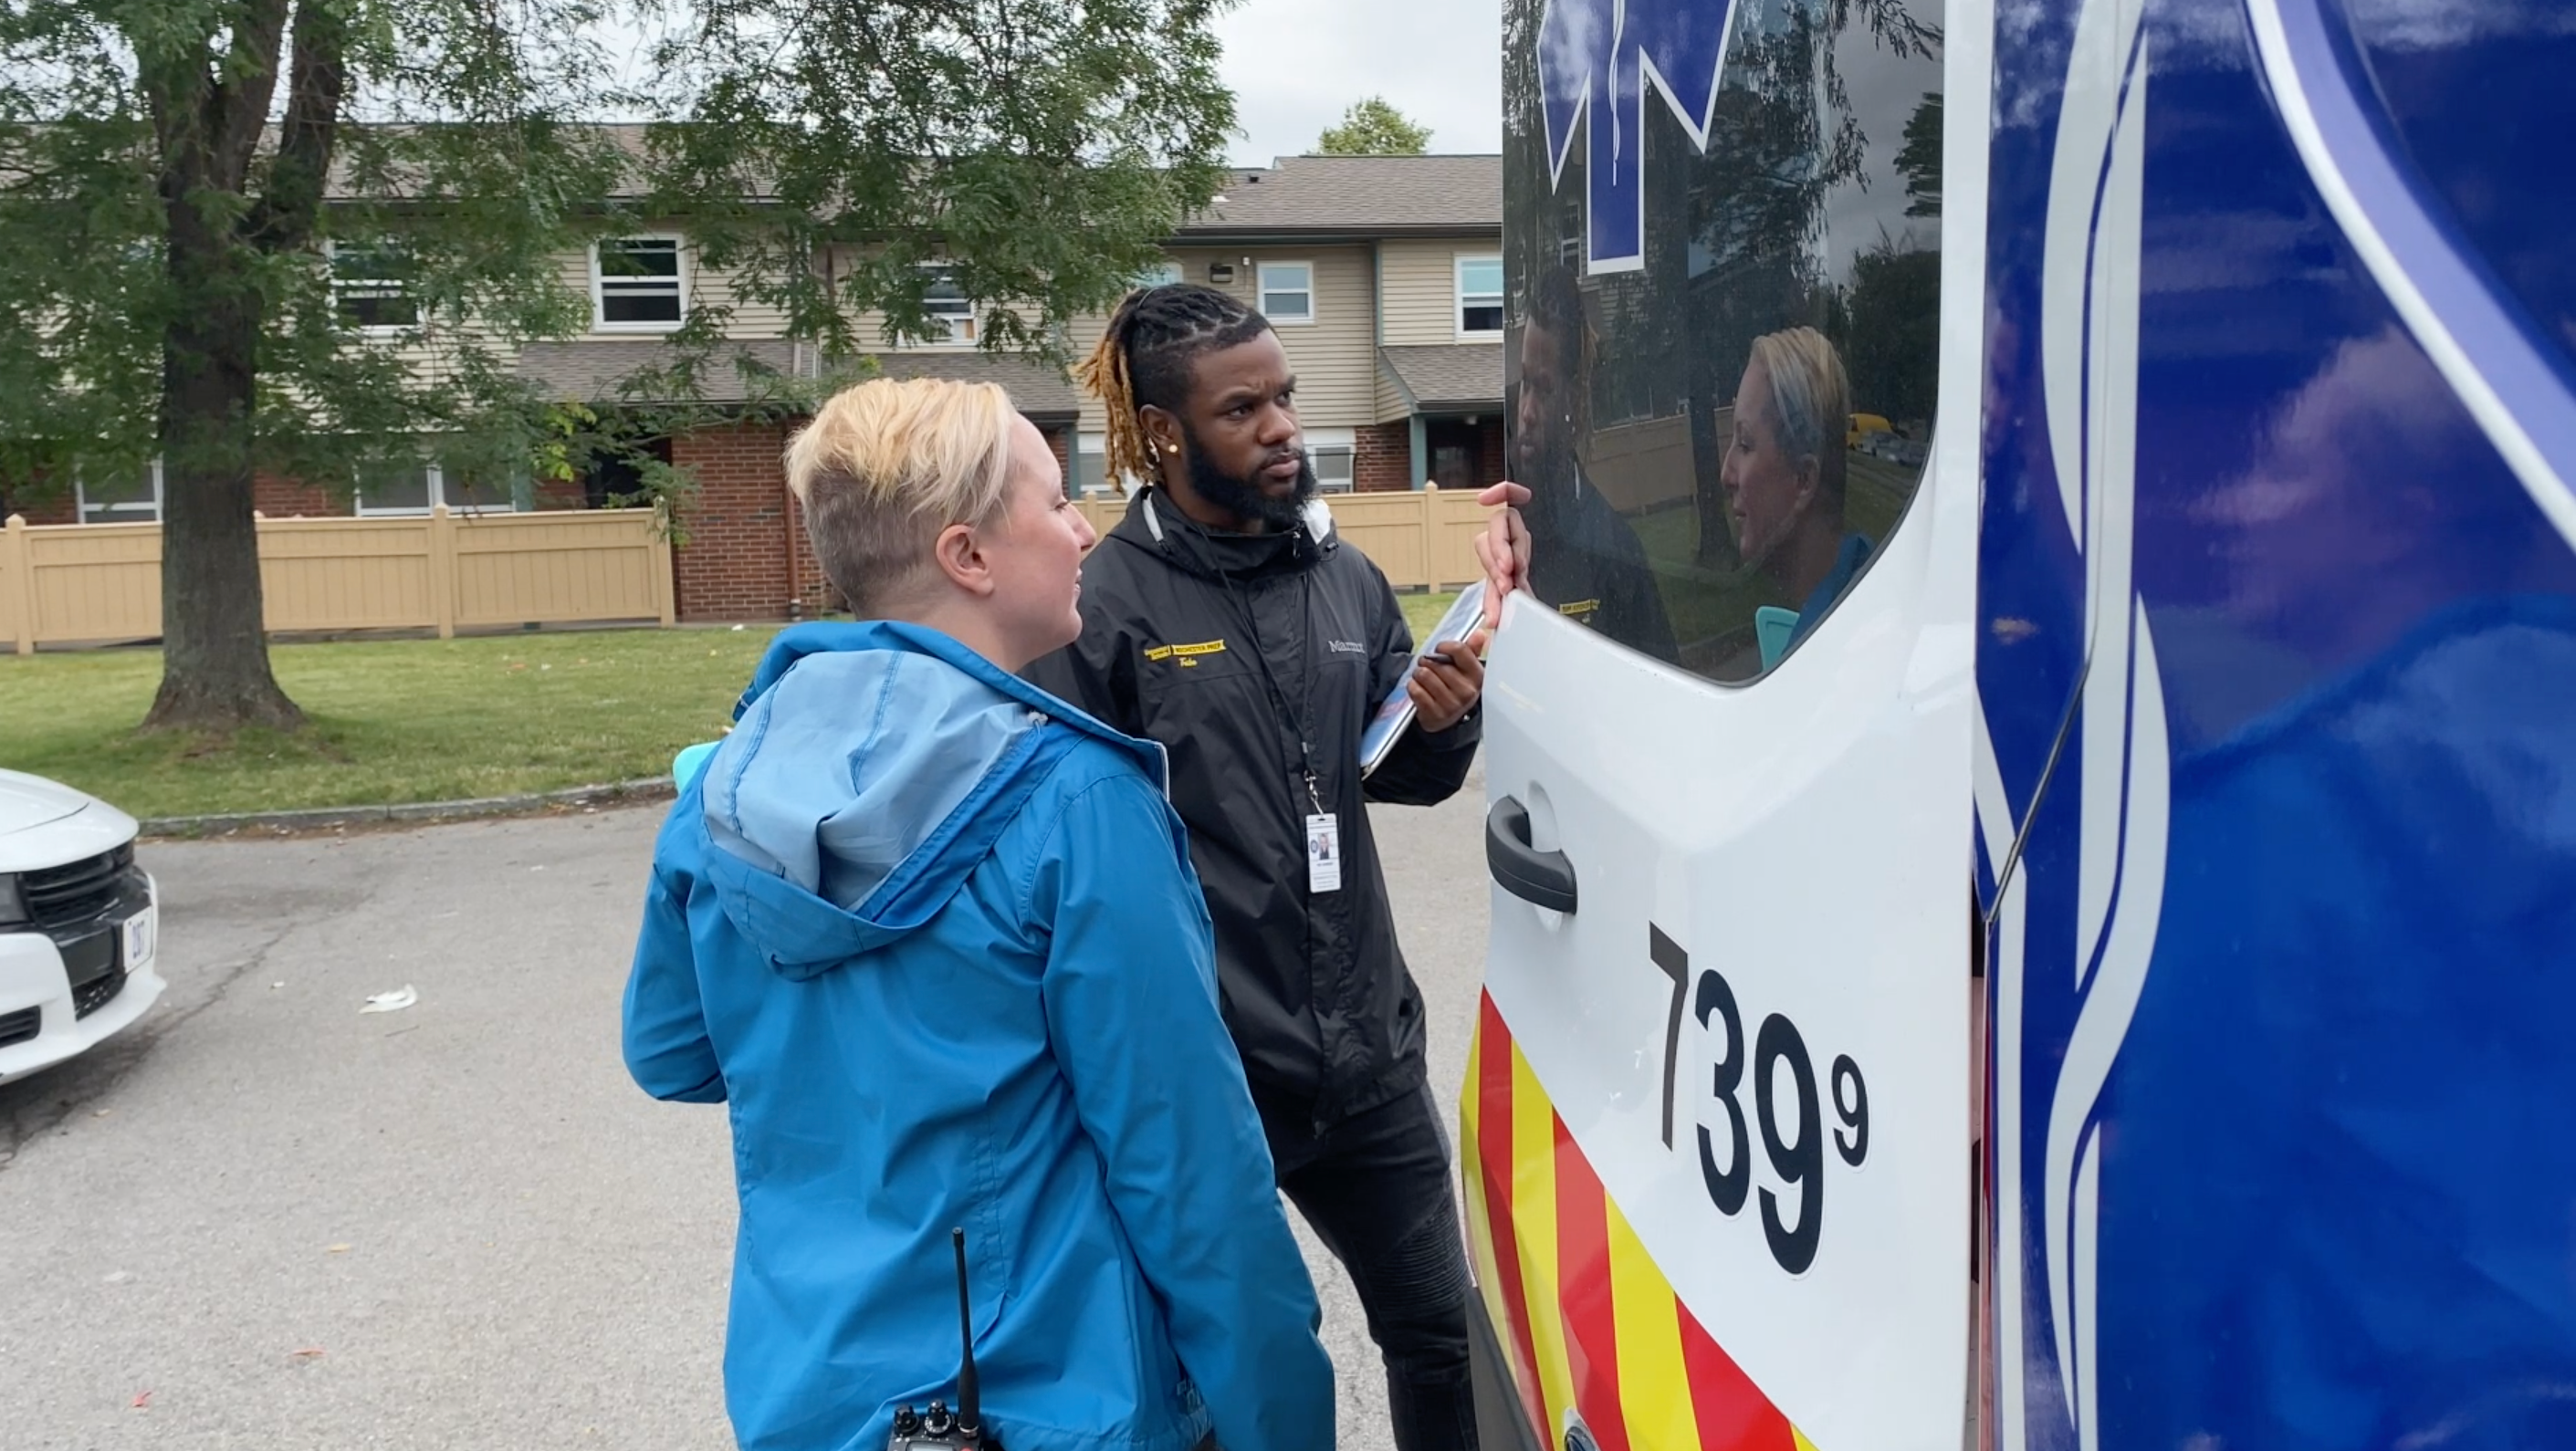 <p>Dre’ Johnson and Renee Brean, part of Rochester’s Person in Crisis team, respond to a call in the city. </p>